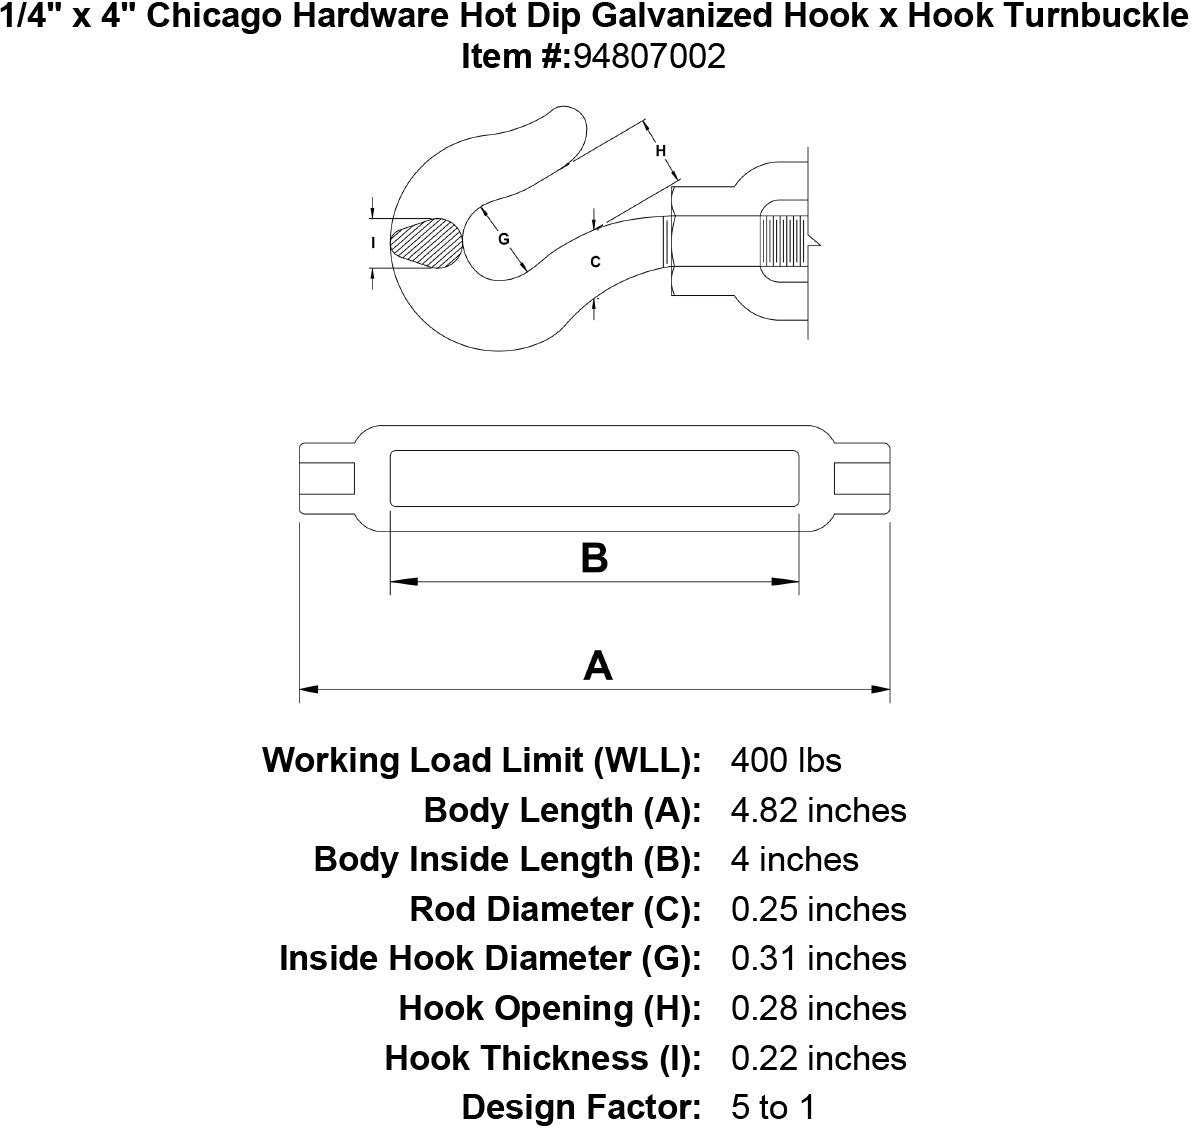 Working Load Limit Galvanized 1/2 x 2 Diameter Chicago Hardware 02170 8 Carbon Hook and Hook Turnbuckle 1,500 lb